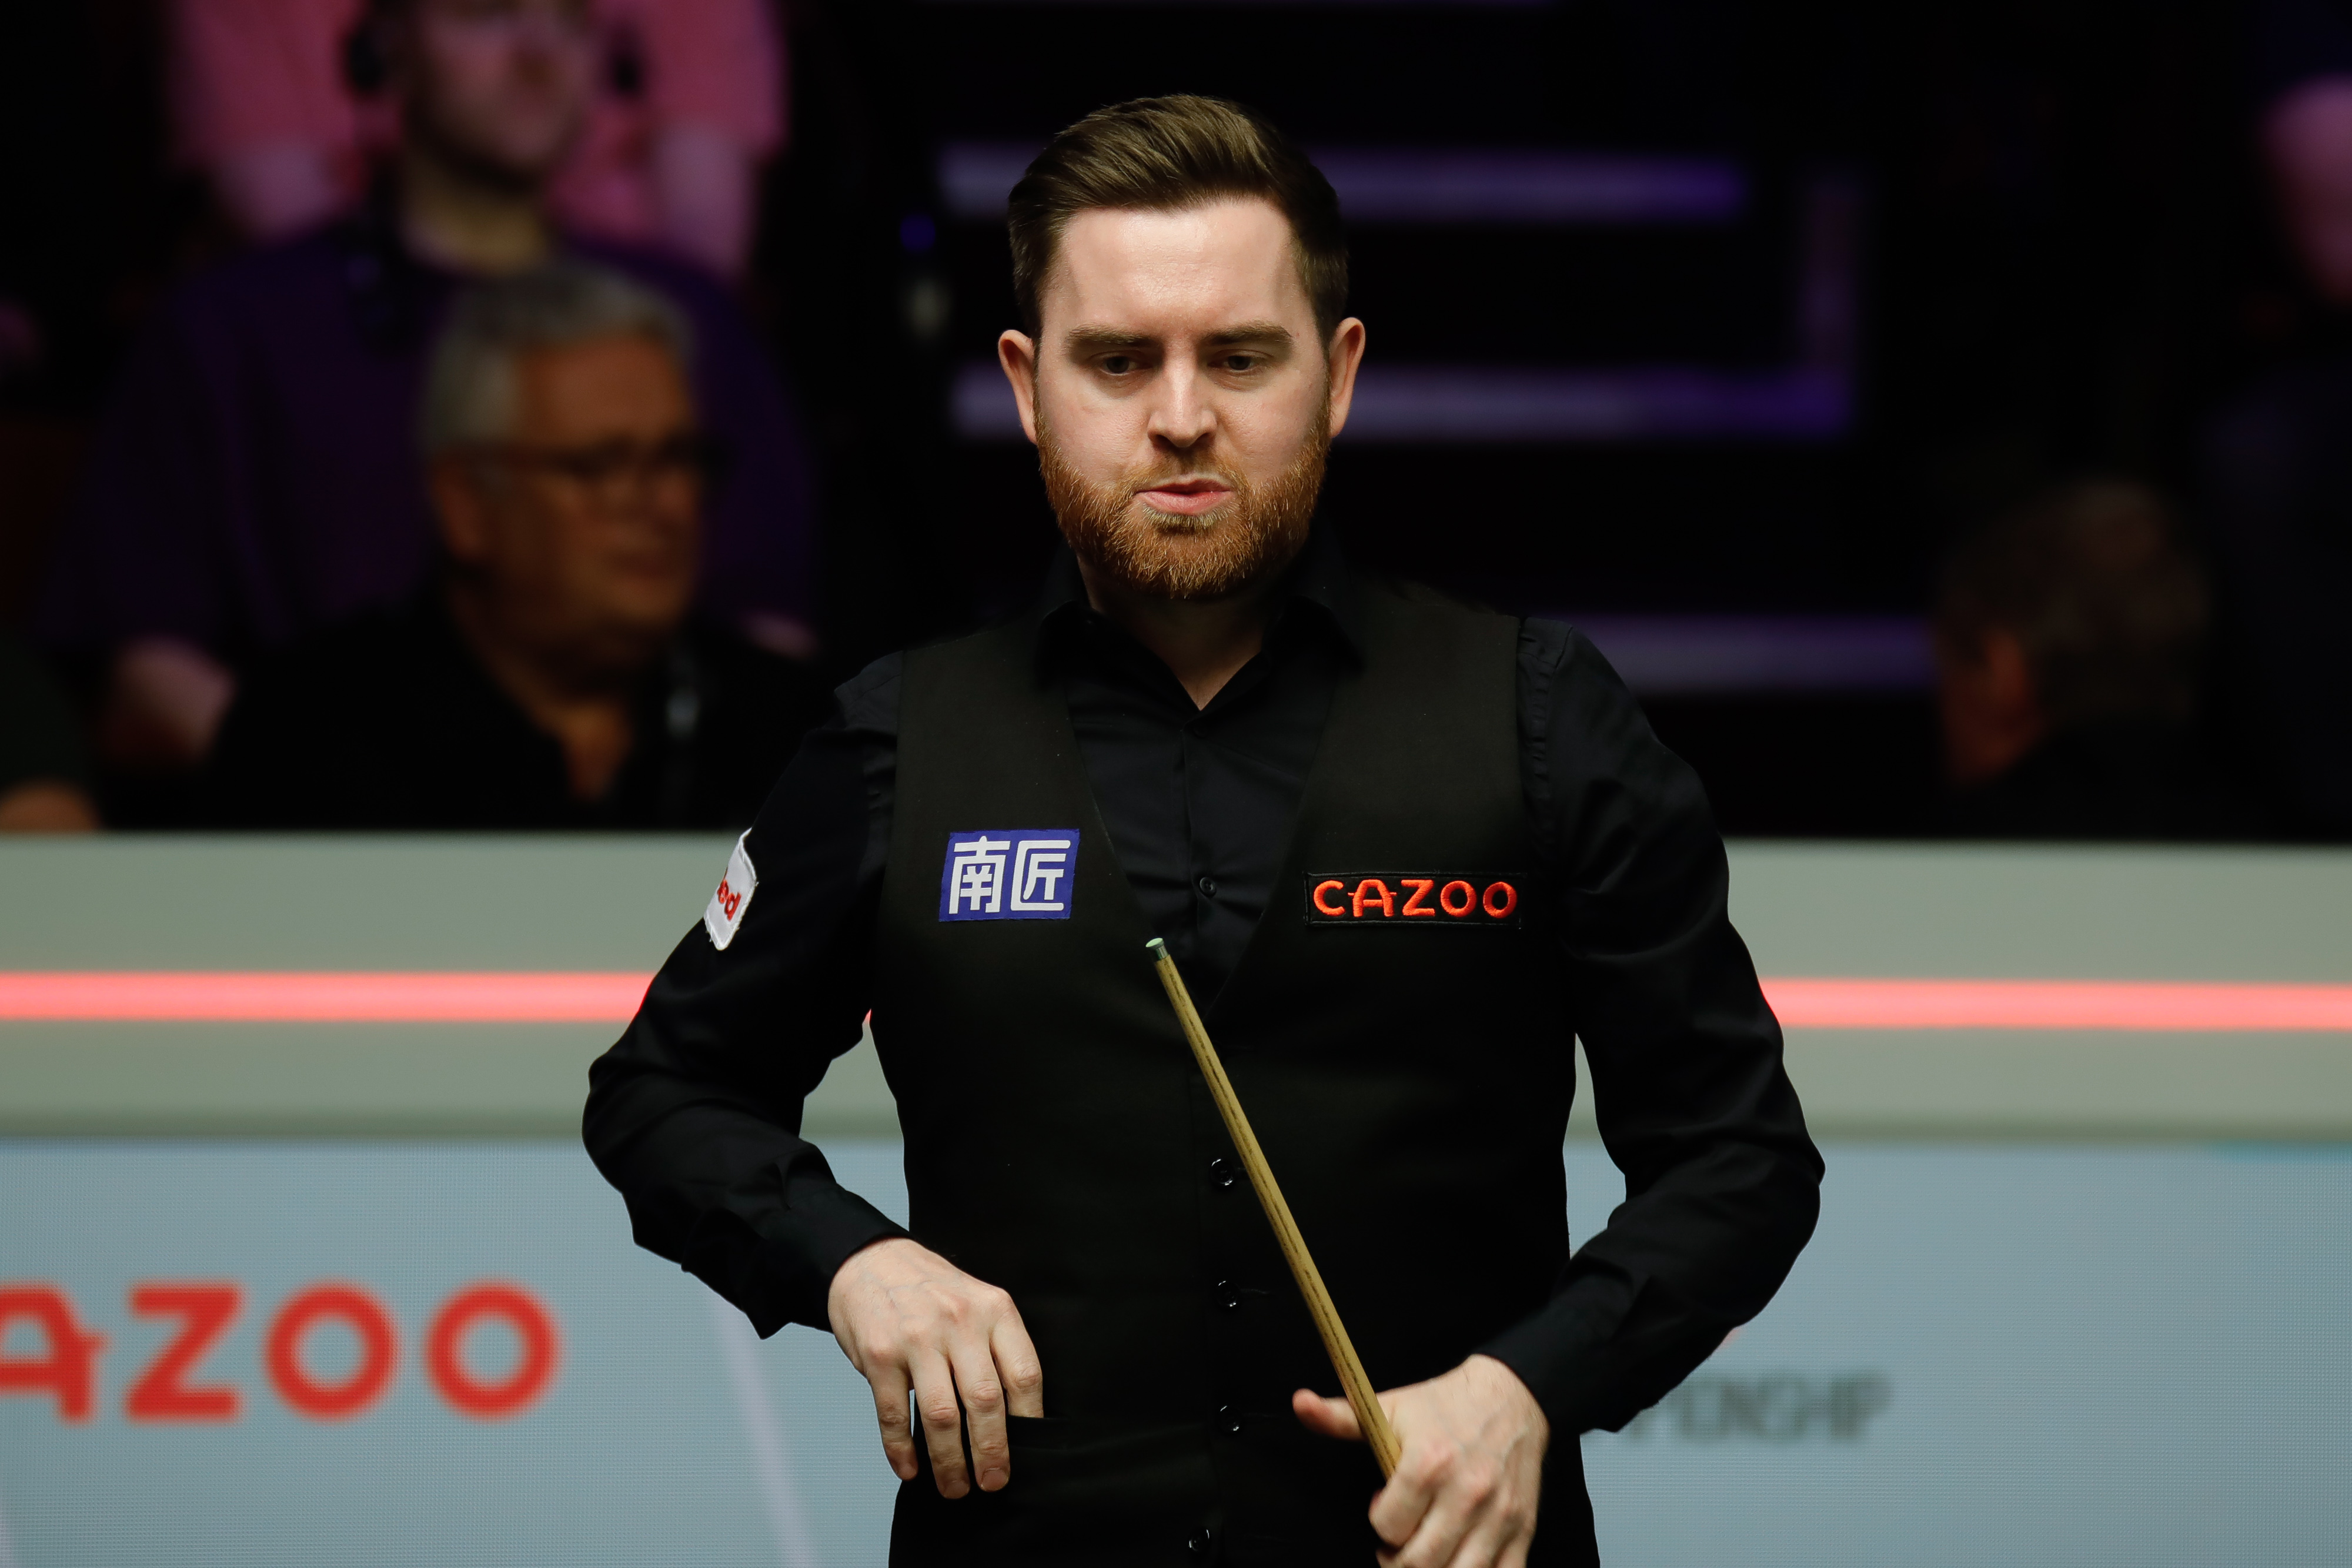 Jak Jones Makes Snooker History, Enters Semi-Finals by Defeating Judd Trump - Conclusion and Looking Ahead